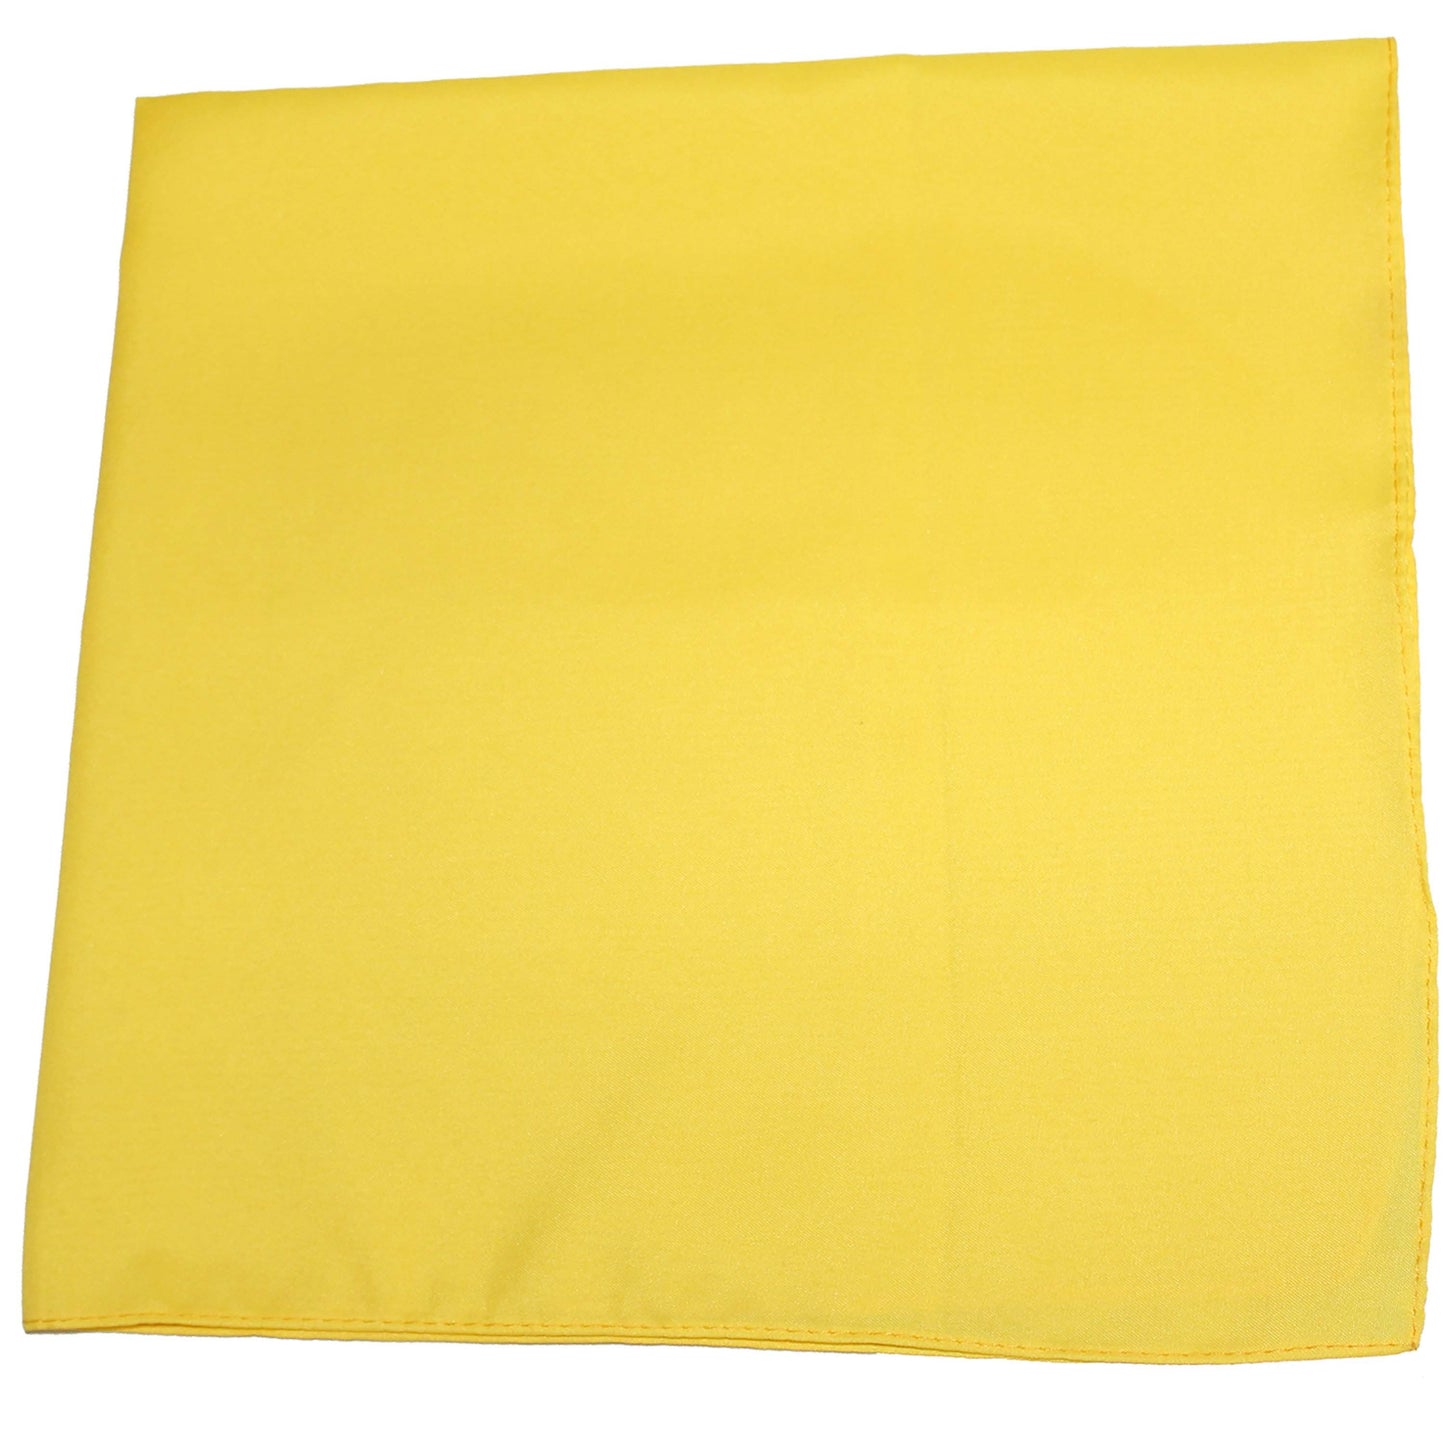 Mechaly Polyester Sewn Edges XL Solid Bandana - 27 x 27 Inches - 5 Pack